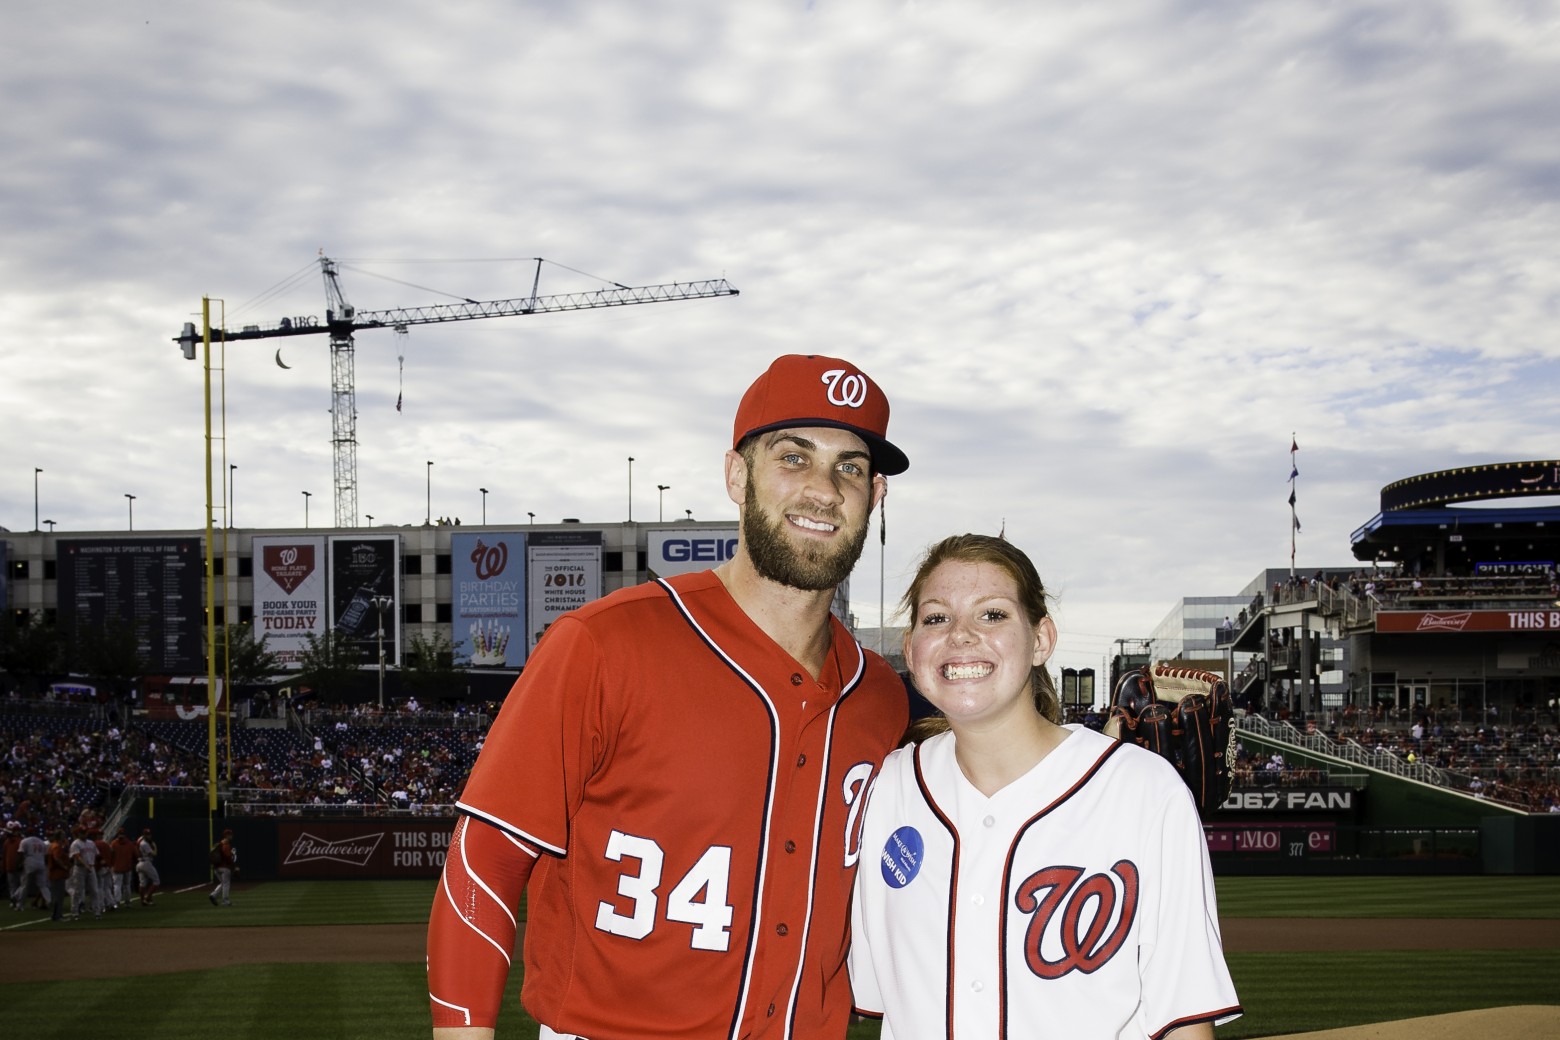 Right before Nationals series, Bryce Harper says he wishes he